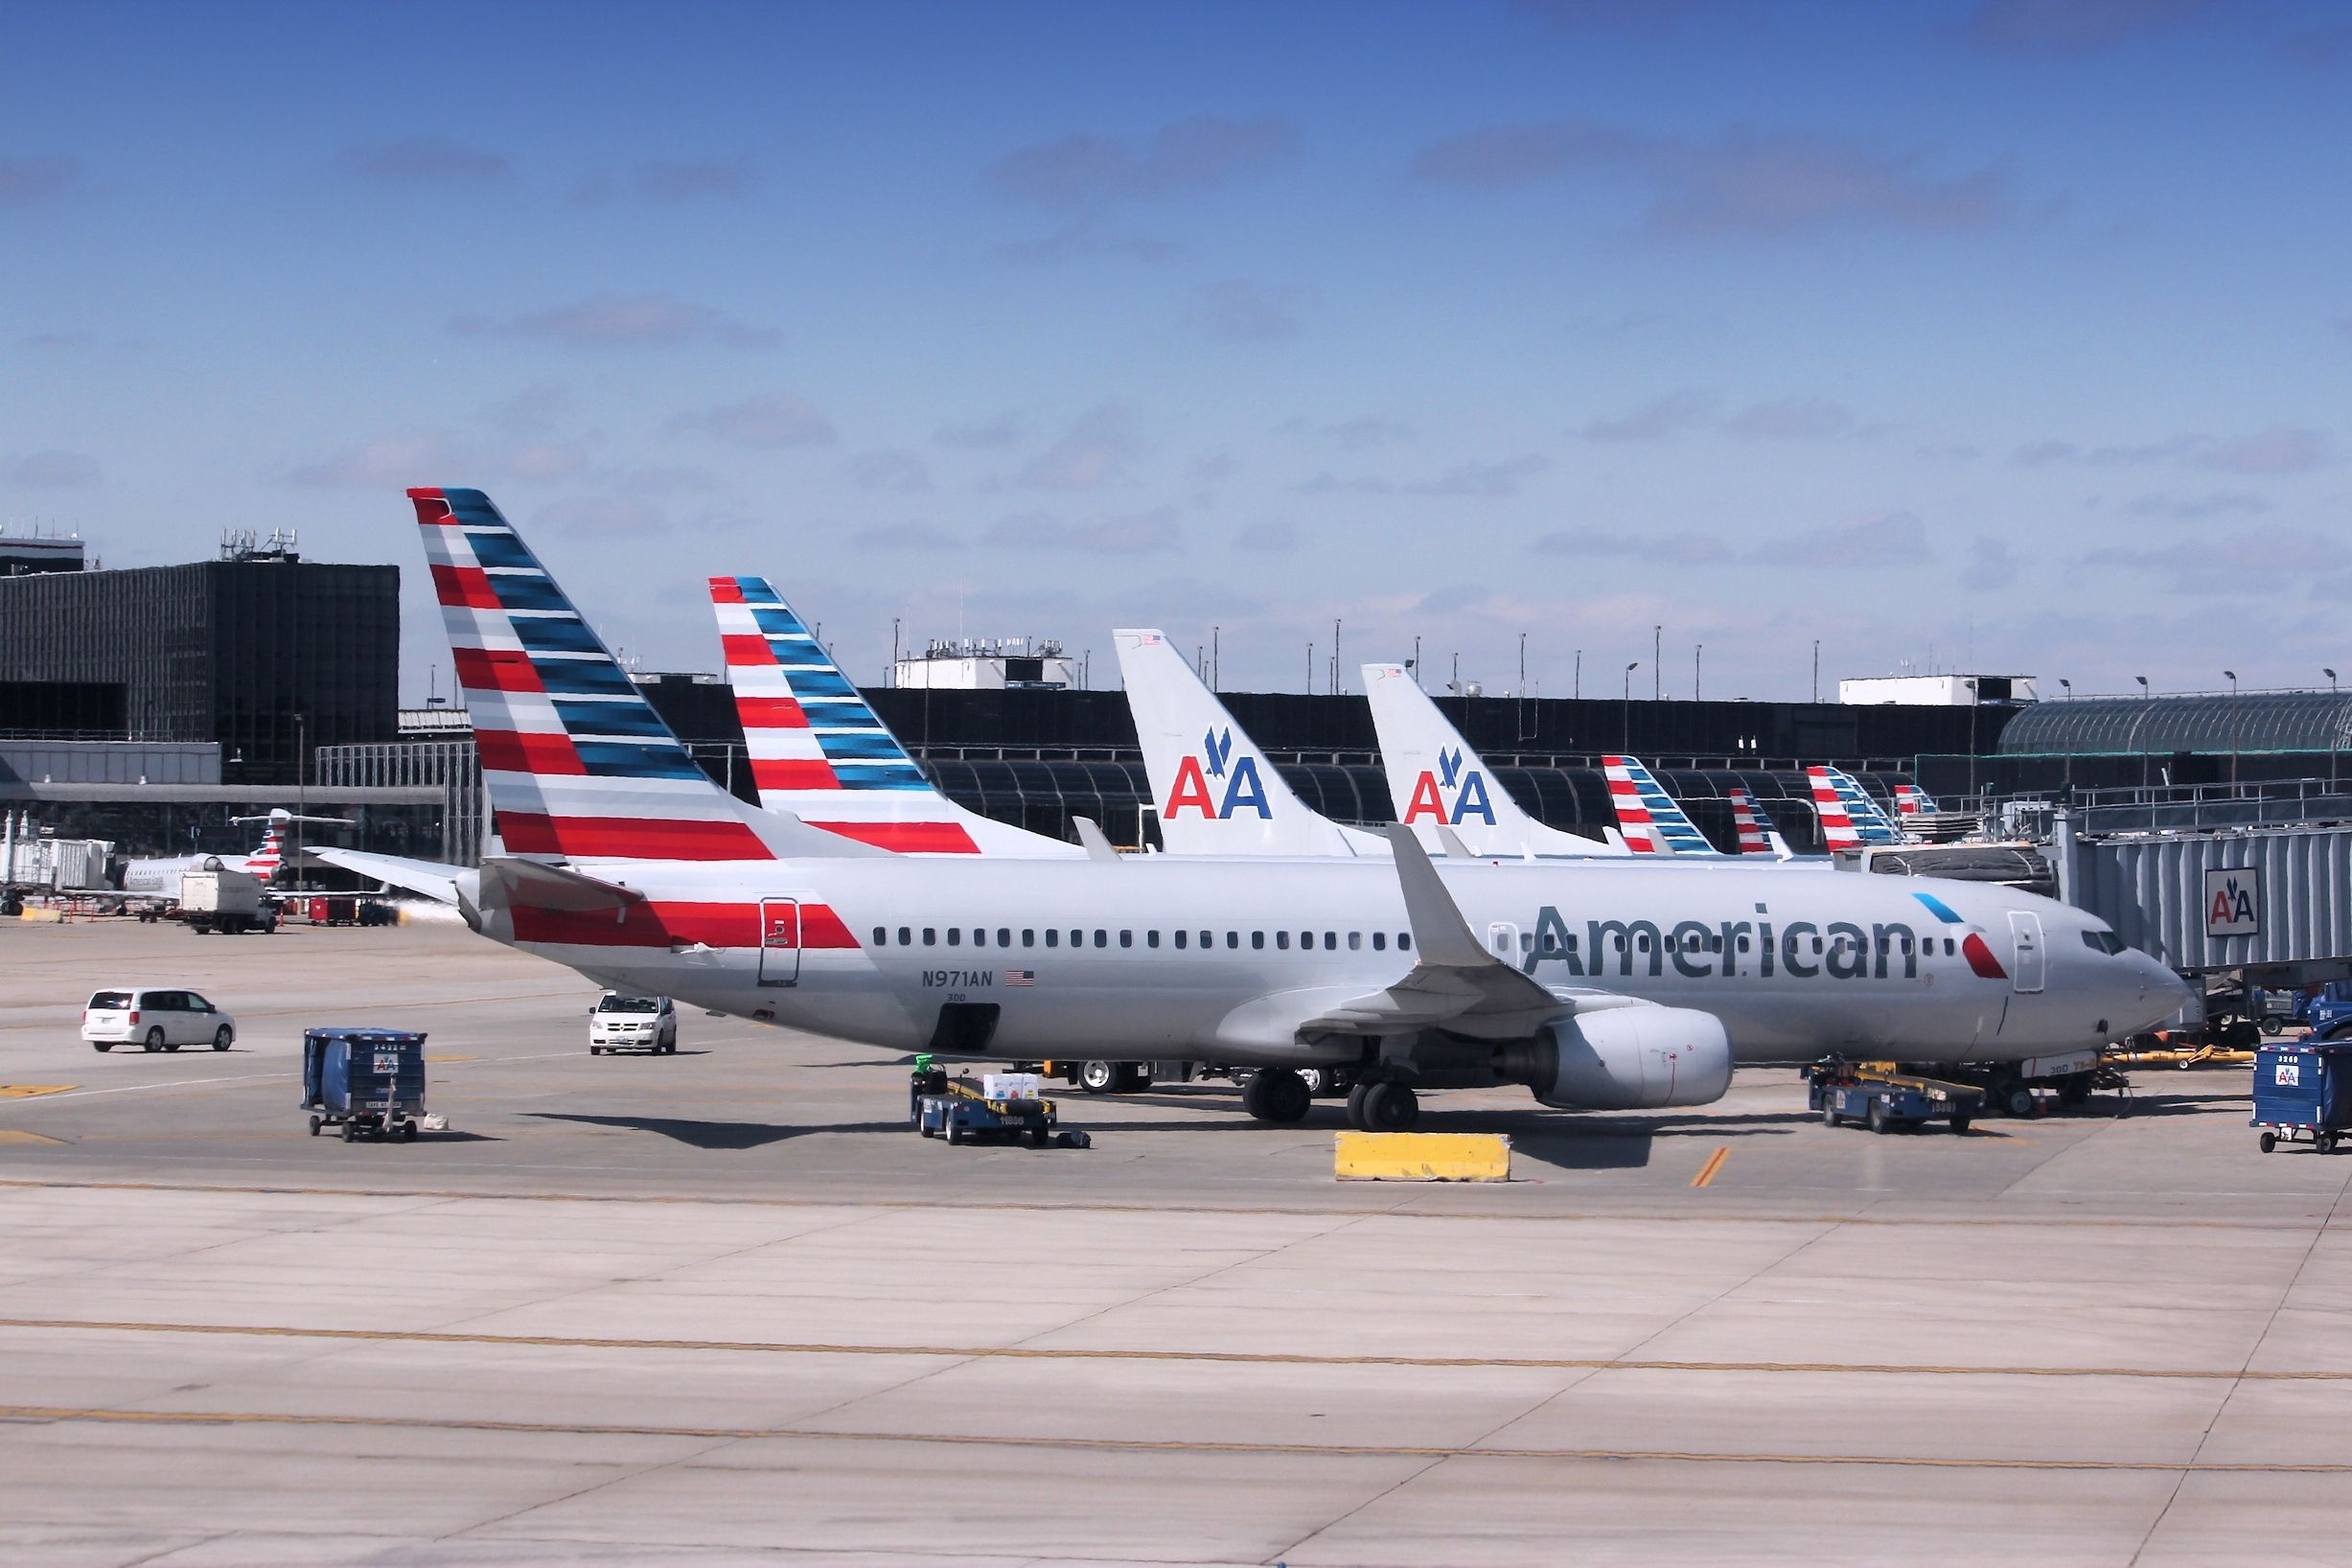 Many American Airlines aircraft lined up next to each other.